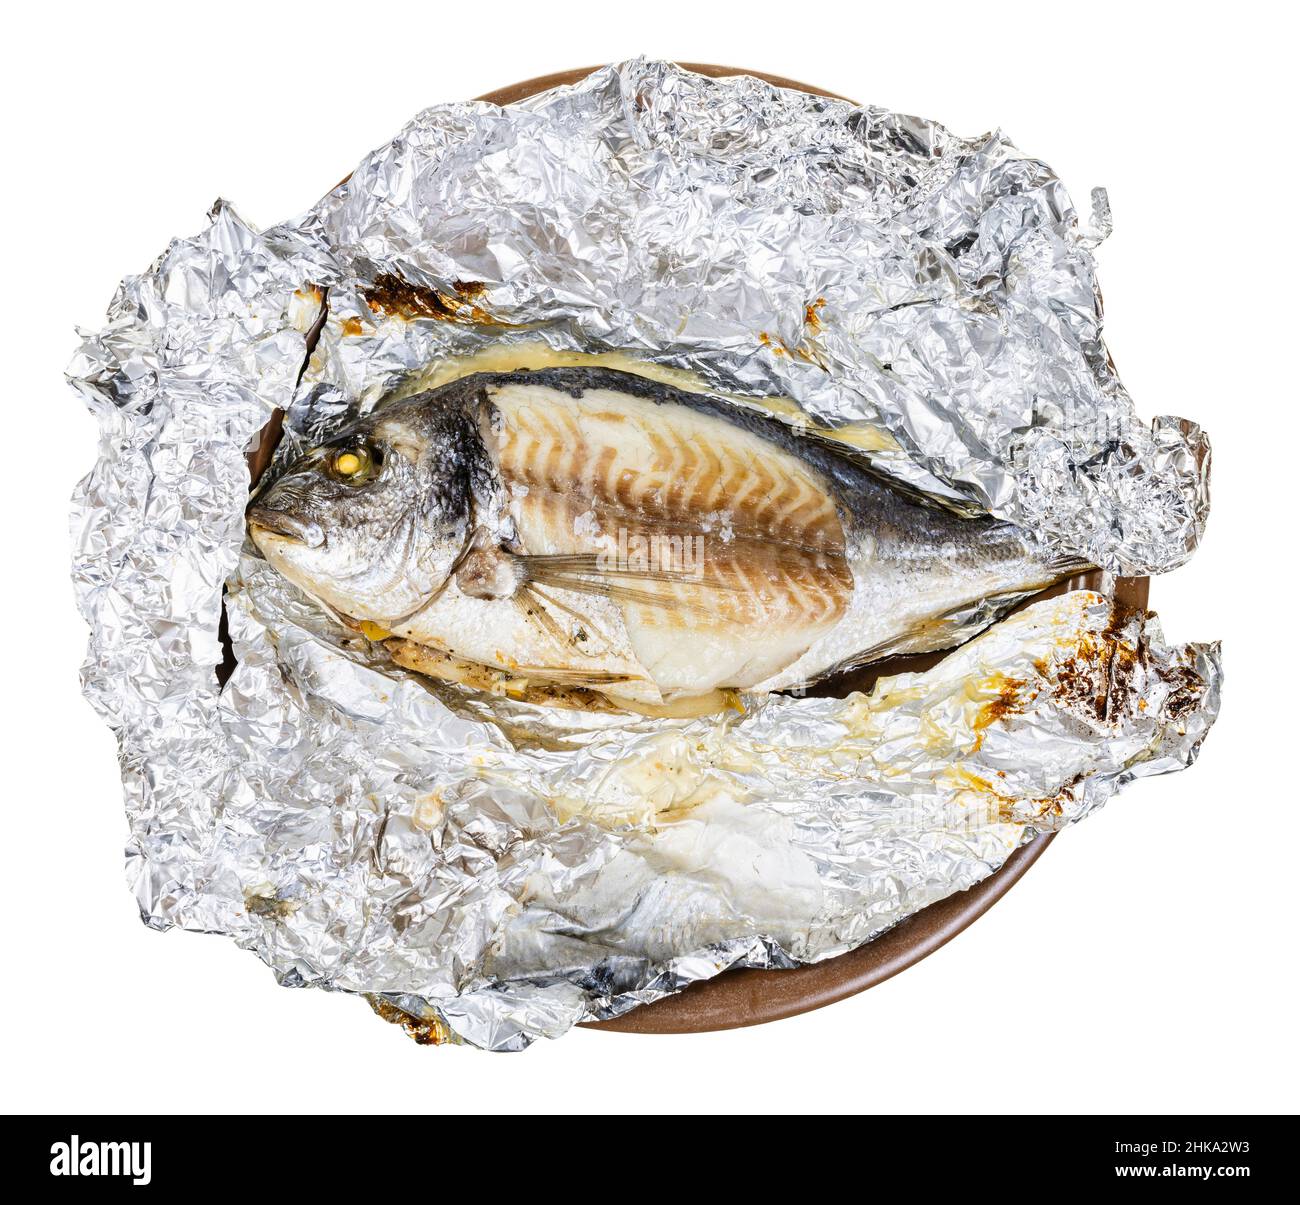 unwrapped whole gilt-head sea bream fish baked in foil on plate isolated on white background Stock Photo